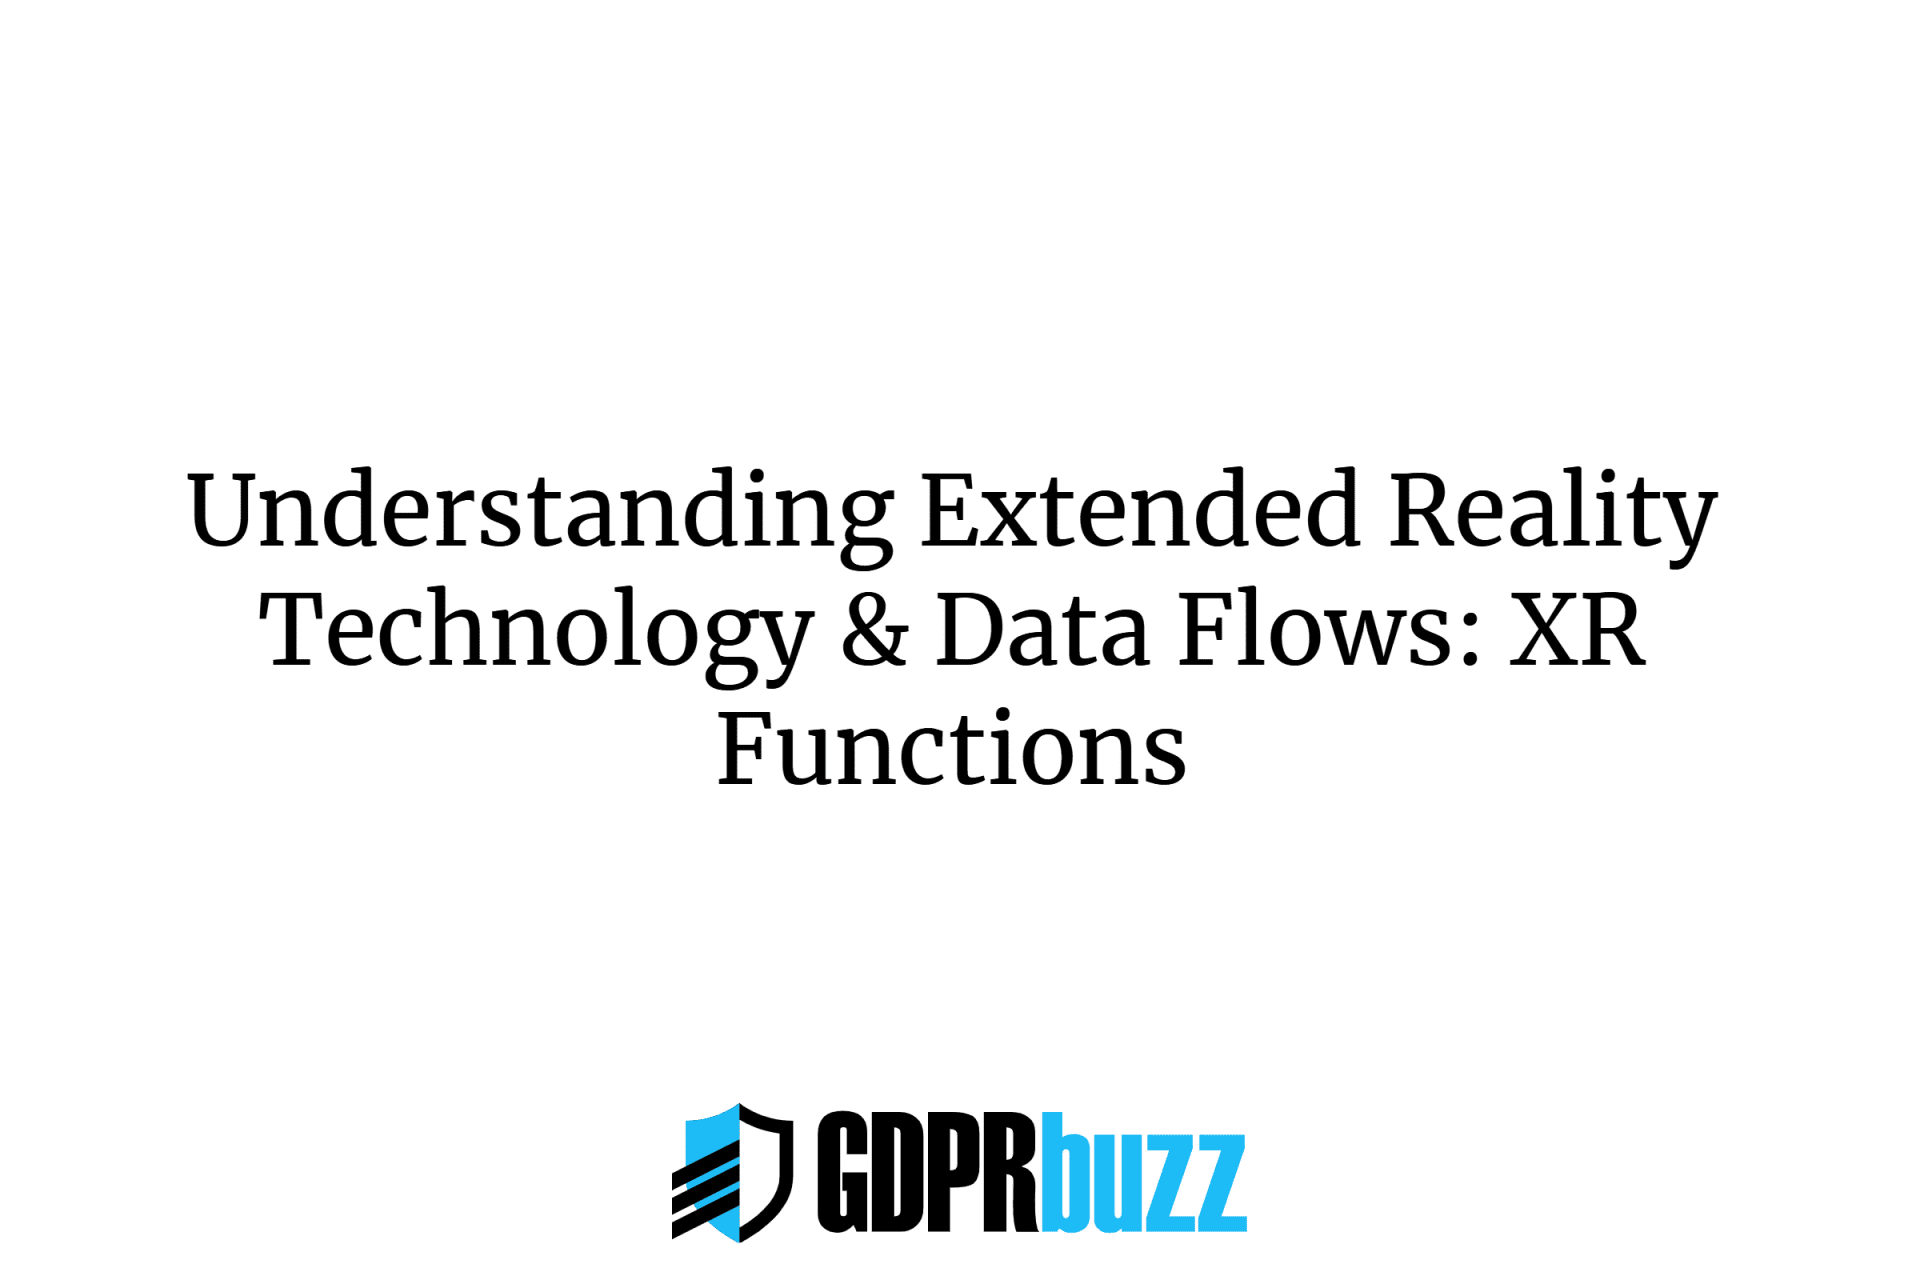 Understanding extended reality technology & data flows: xr functions